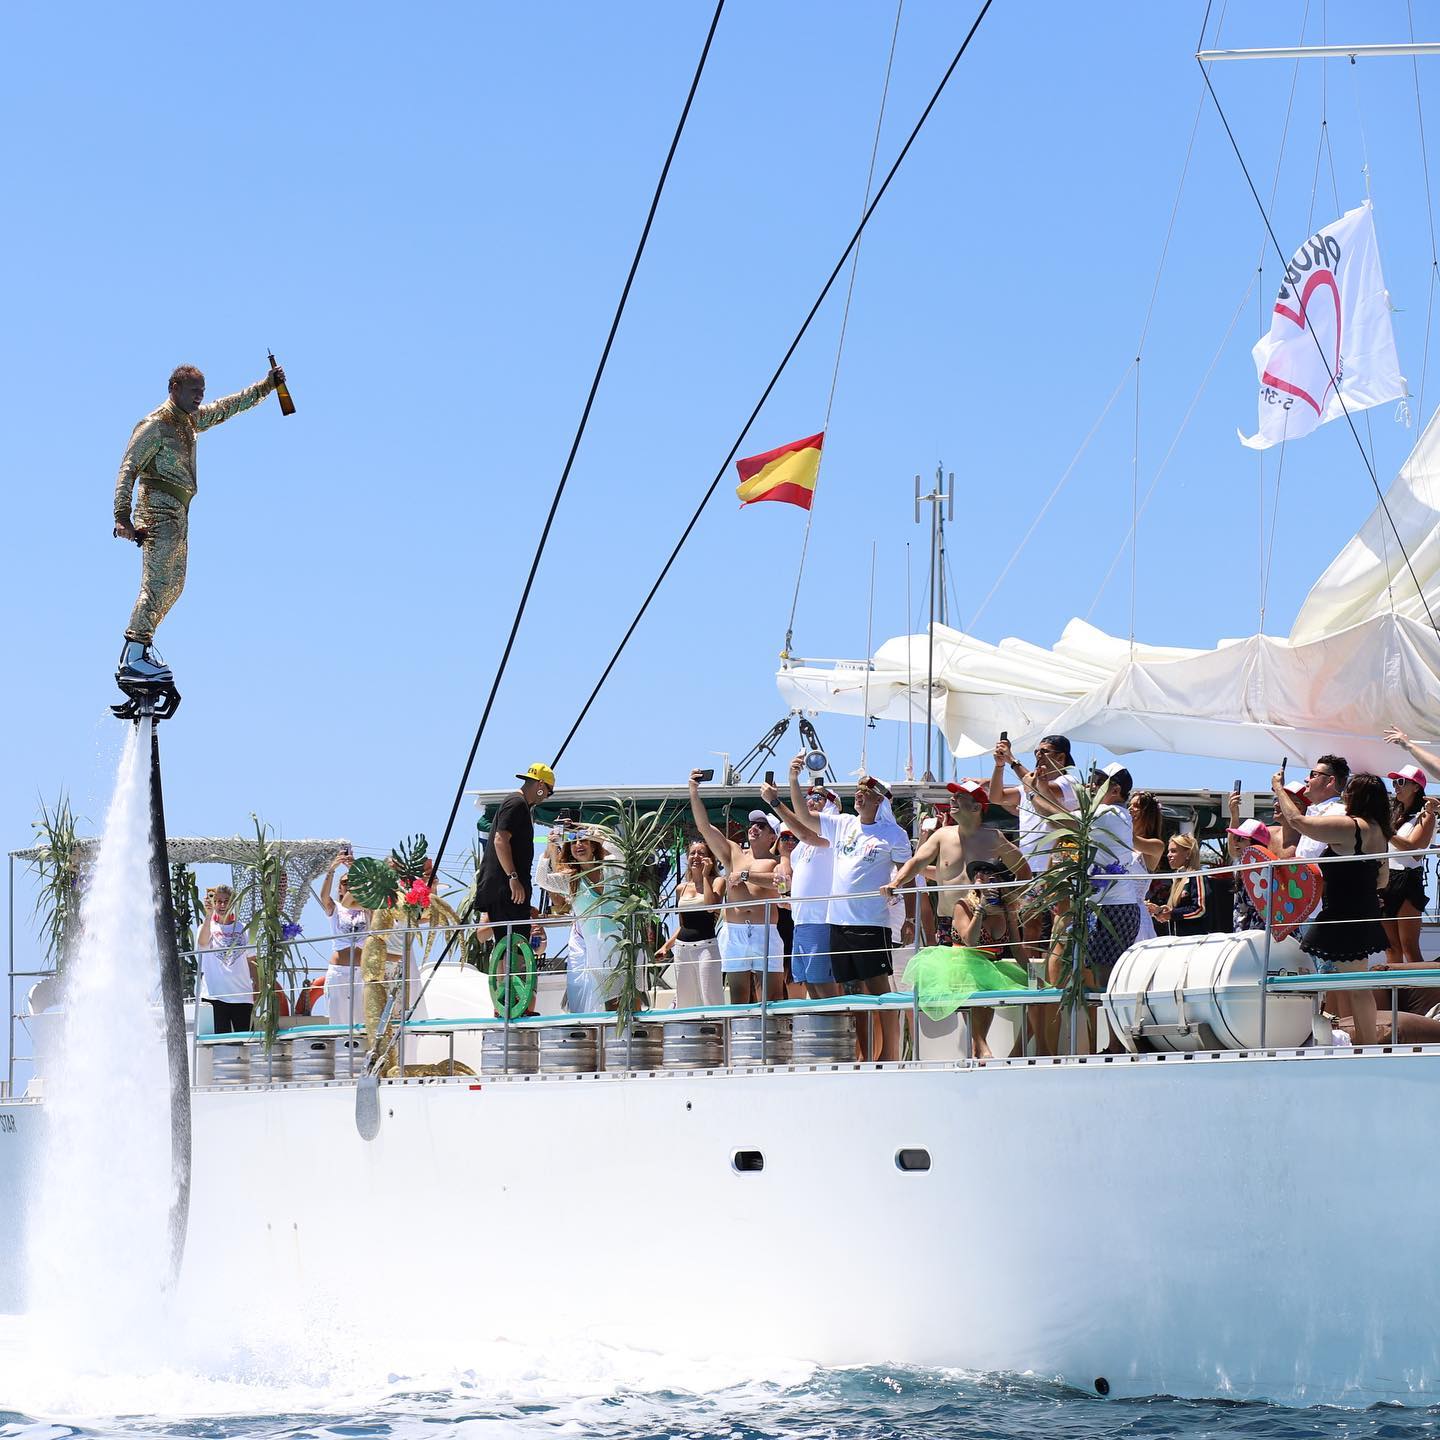 Enjoy the view while flyboarding in Ibiza